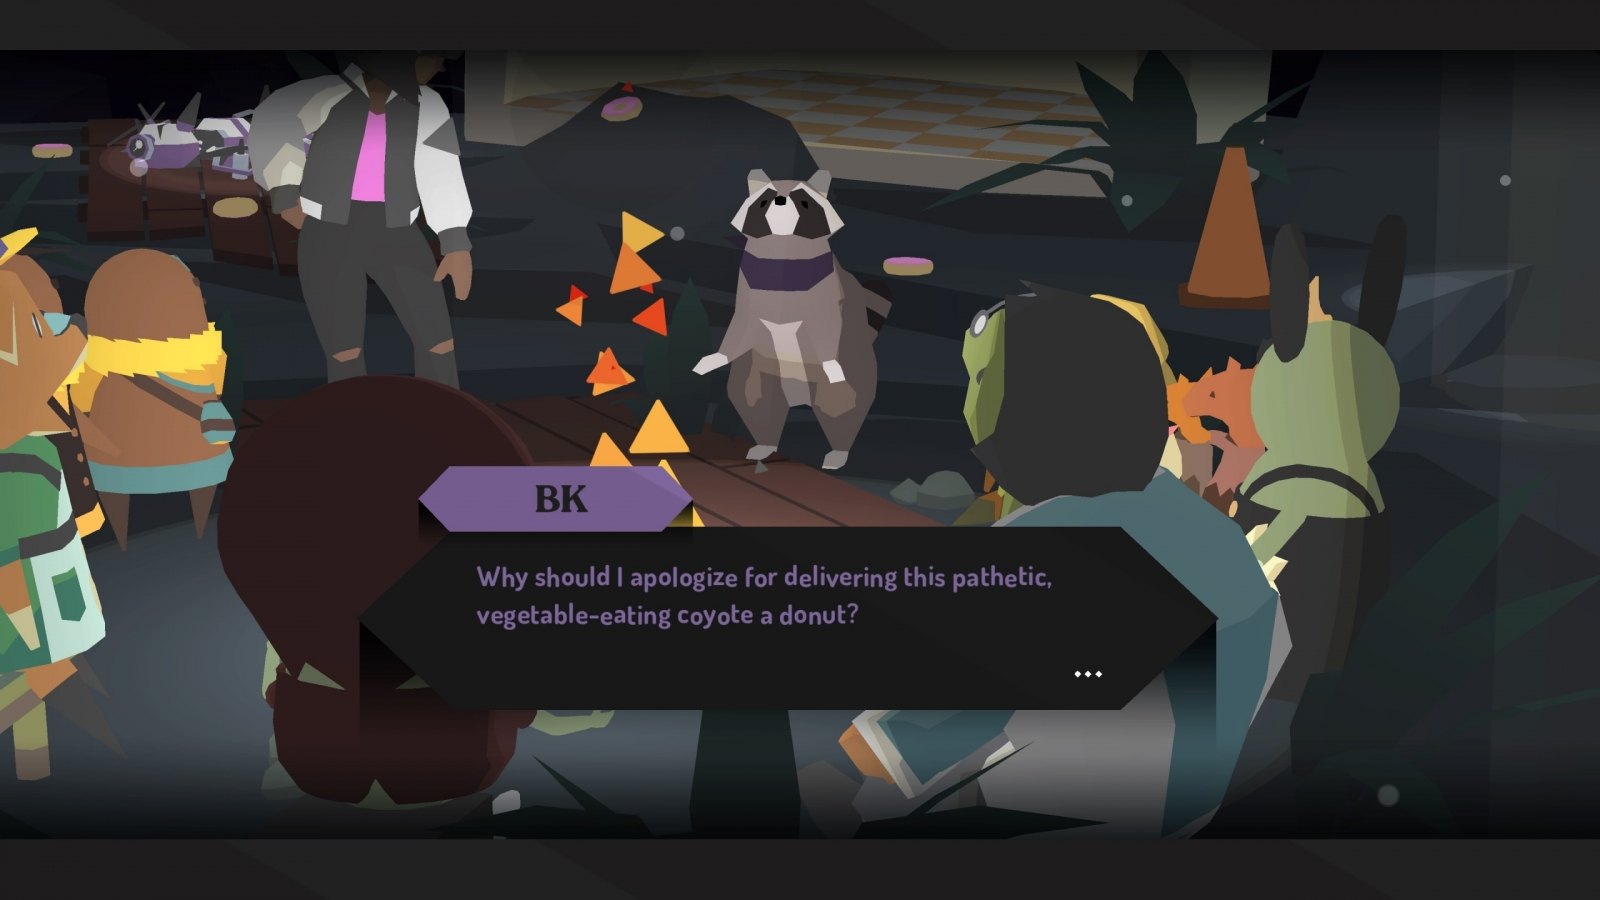 download free donut county full game